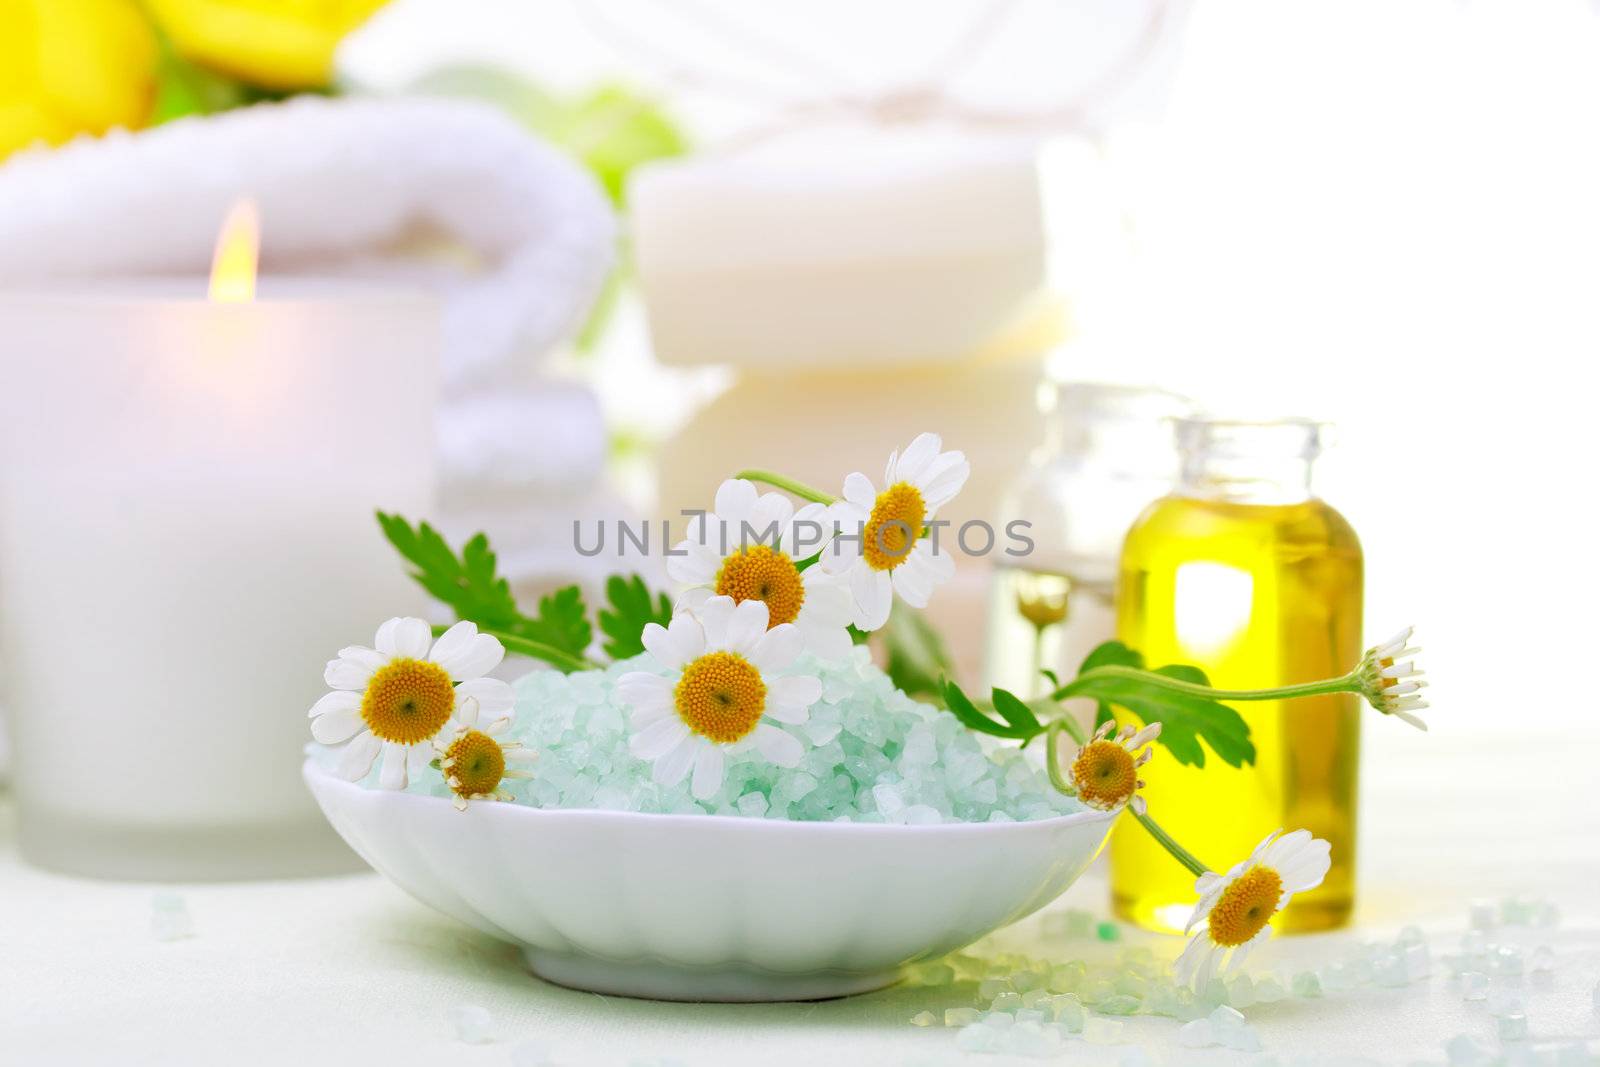 Spa relaxation theme with flowers, bath salt, essential oil, towels and candles